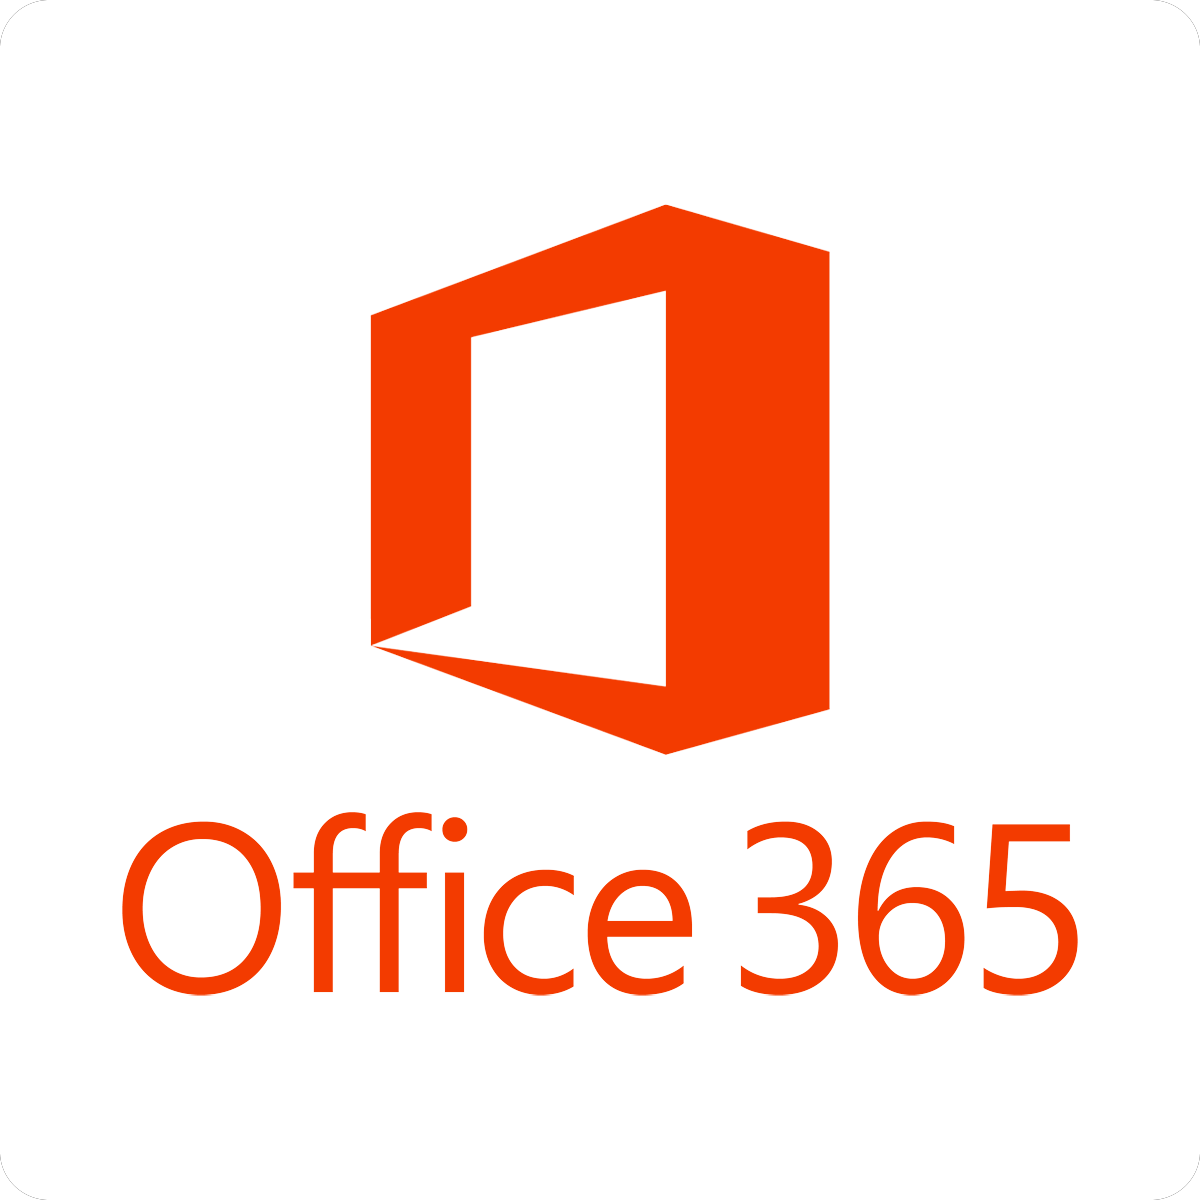 Synchronize Office 365.